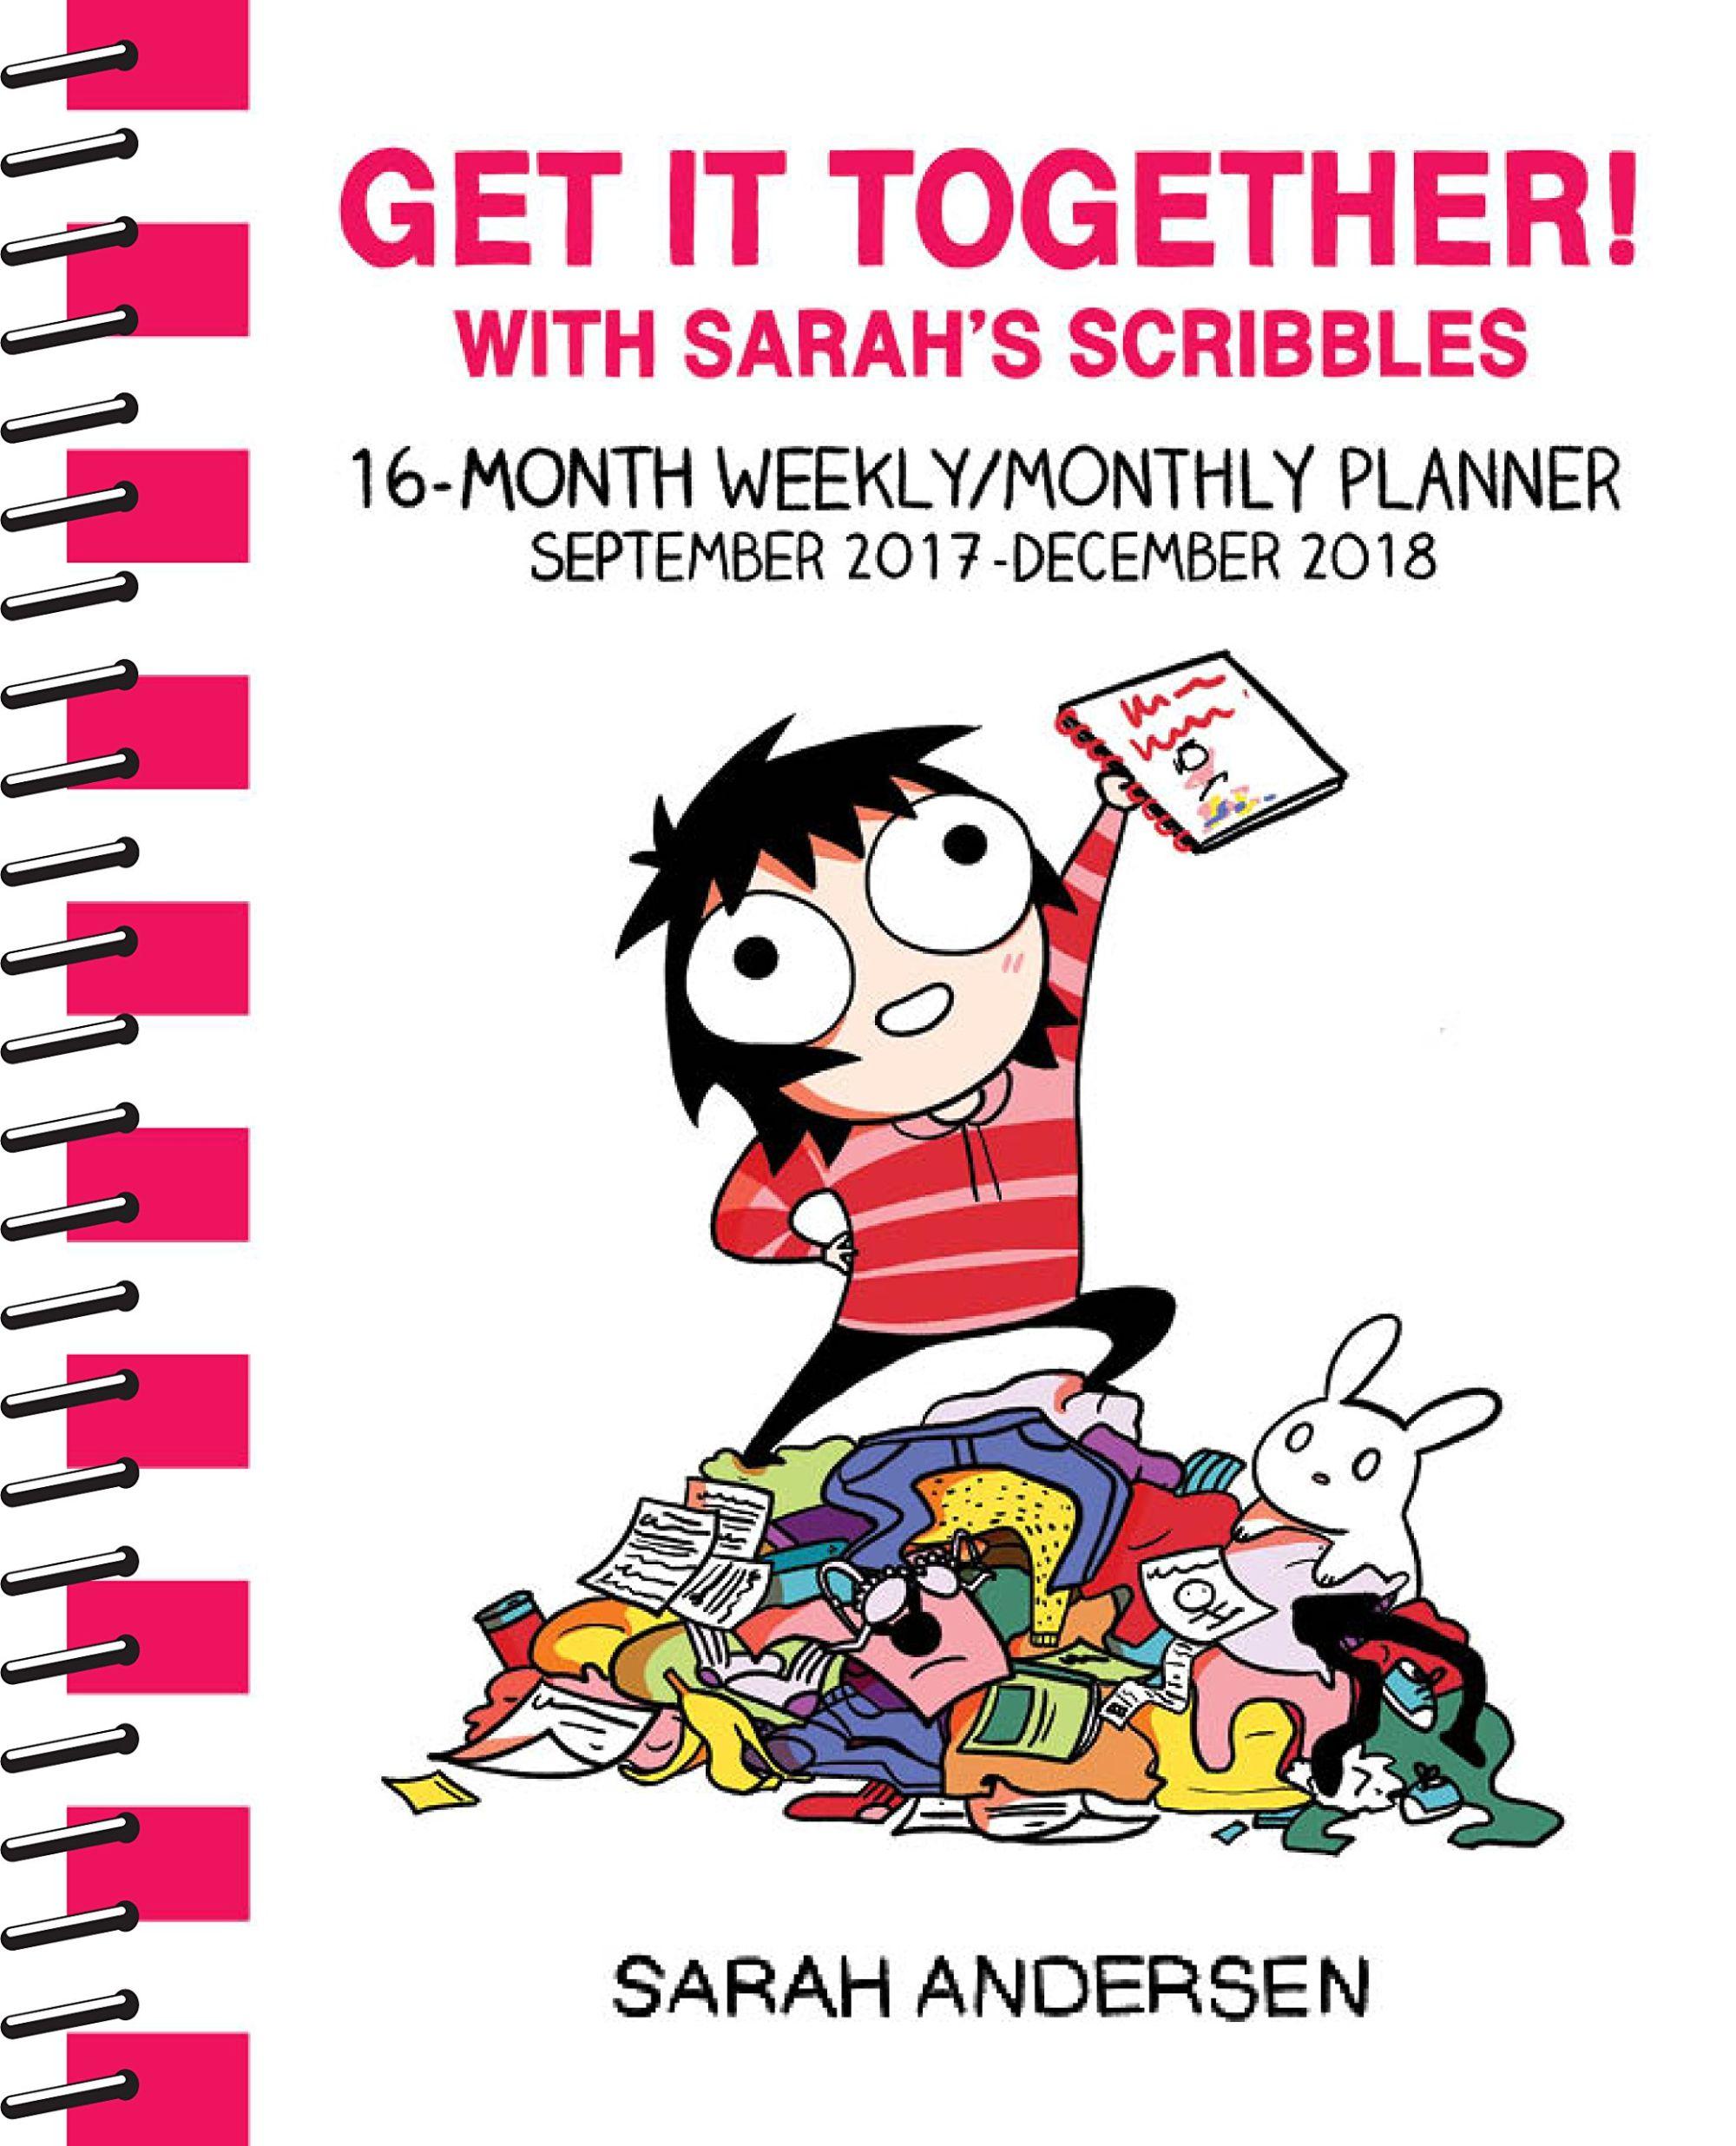 2018 Sarah's Scribbles 16-Month Weekly/Monthly Planner